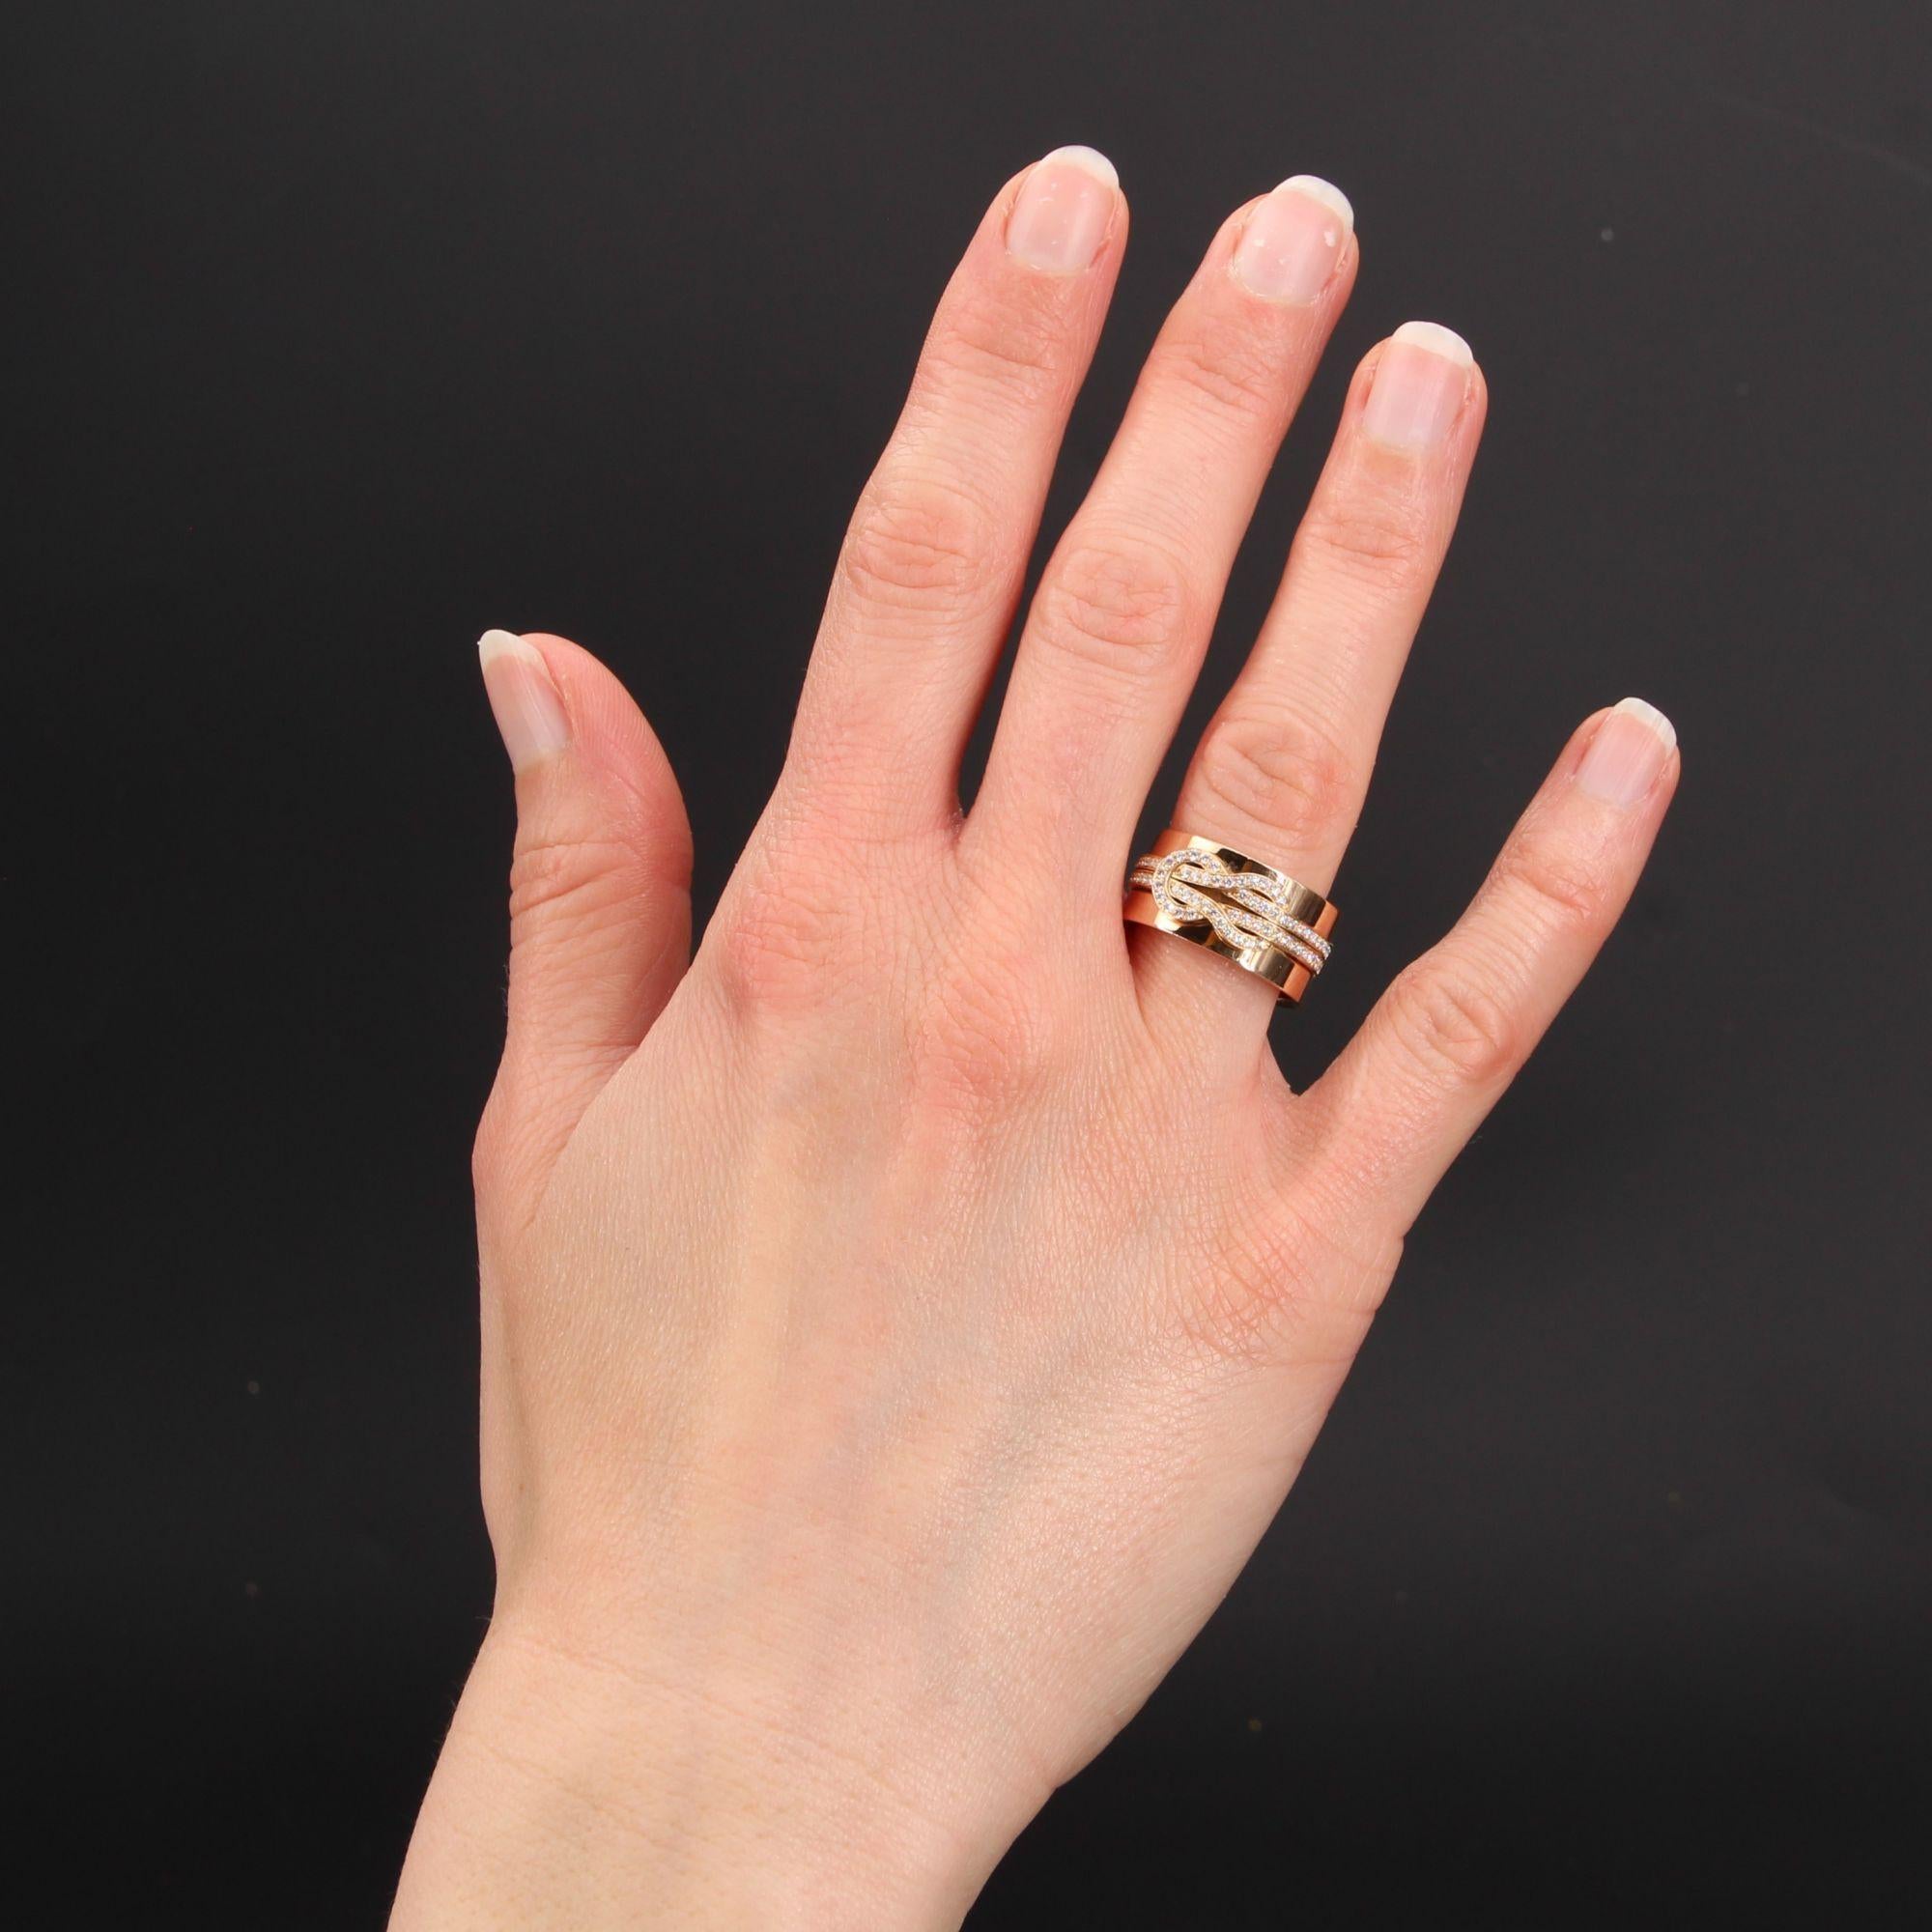 Ring in 18 karat rose gold, eagle head hallmark.
Second- hand ring signed Fred rom the collection 